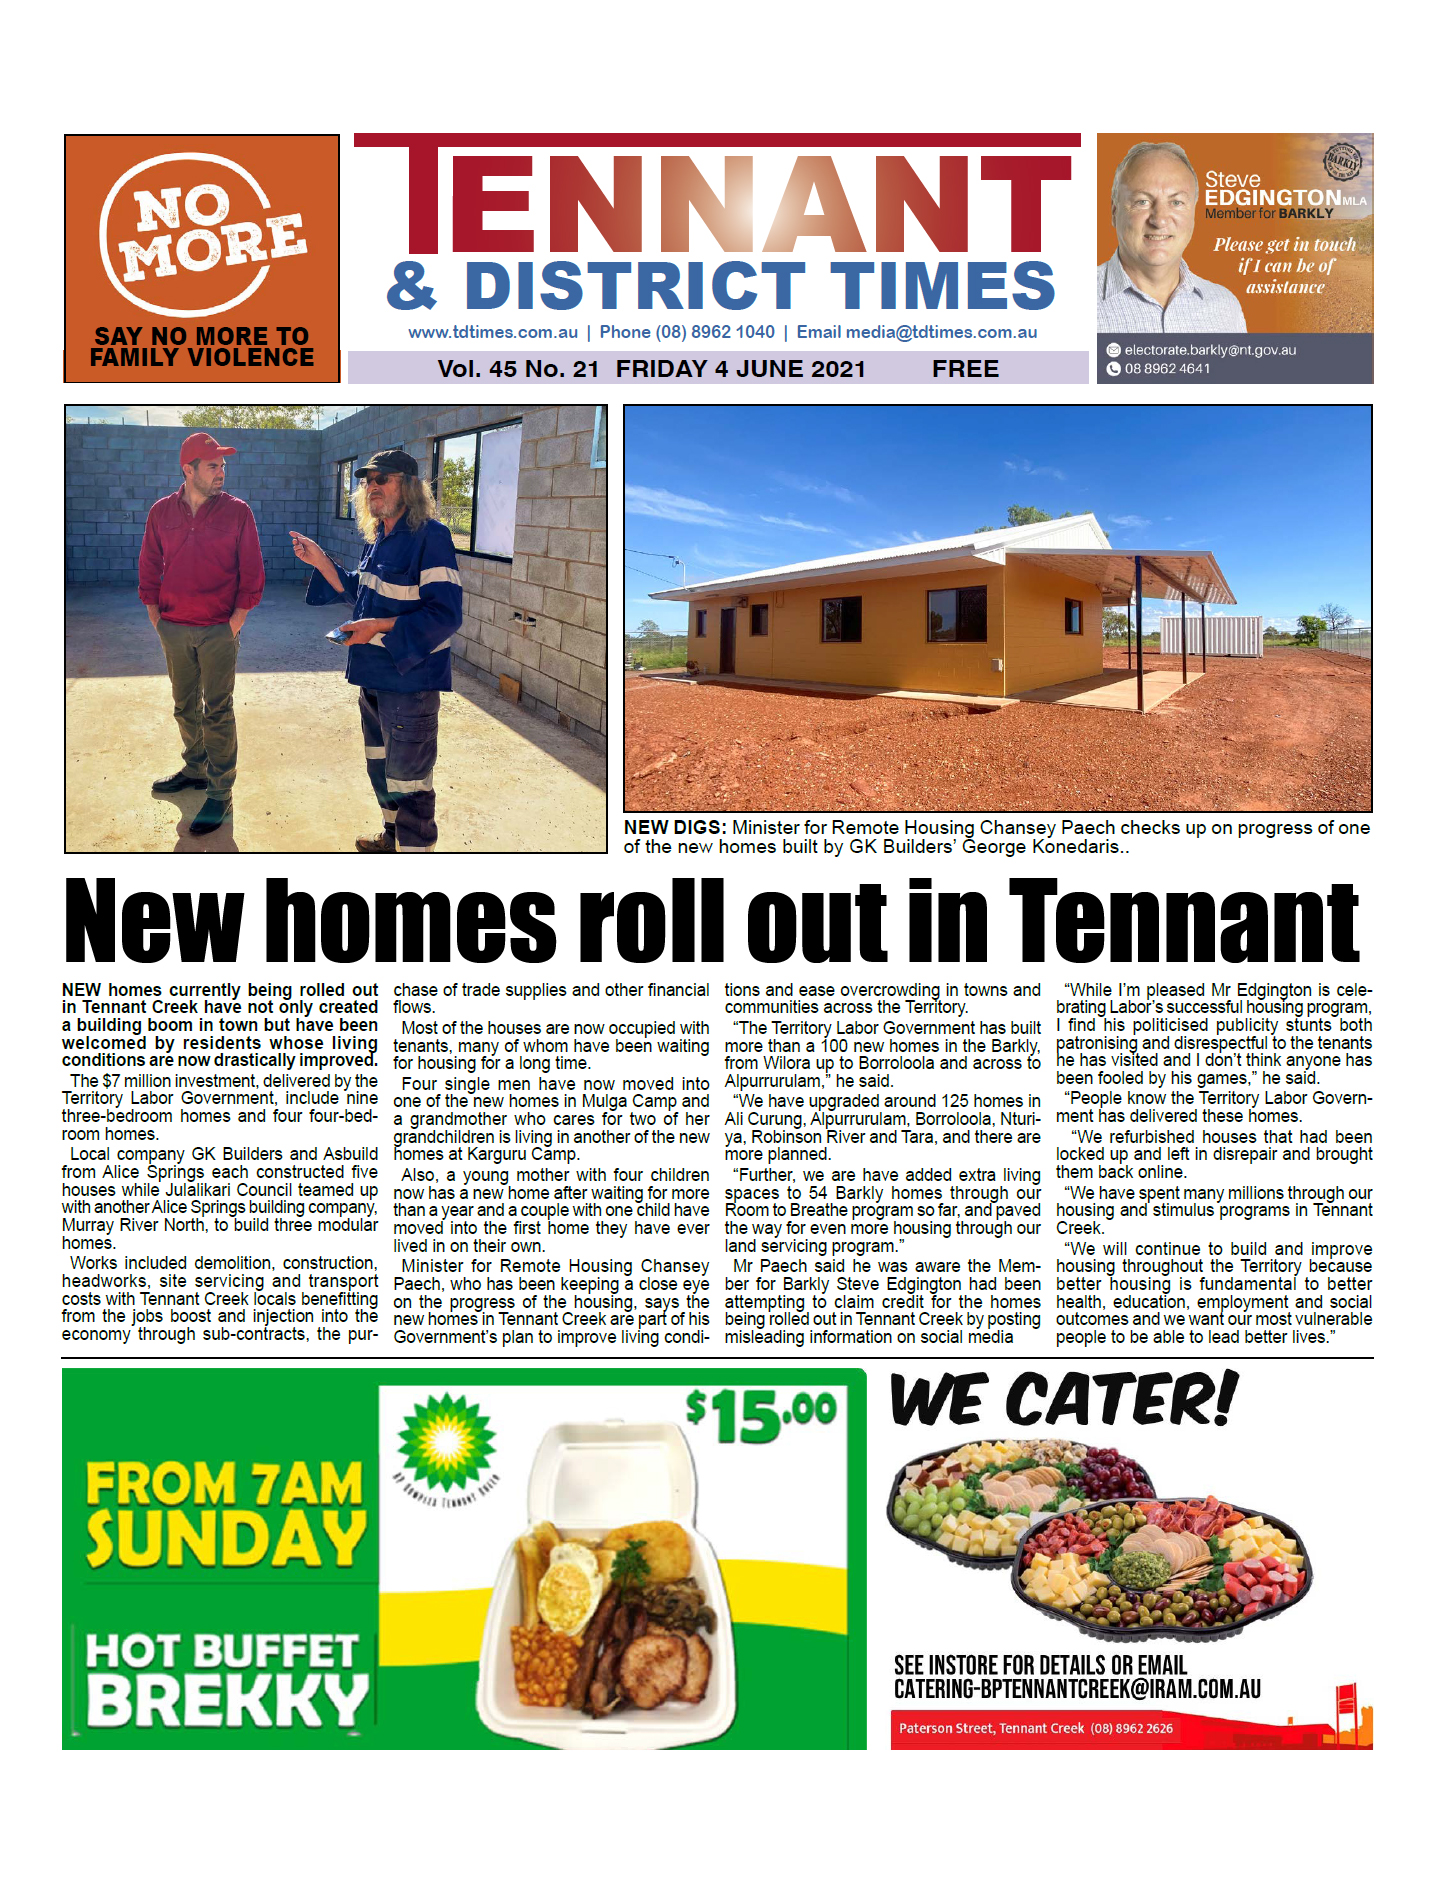 Tennant & District Times 4 June 2021